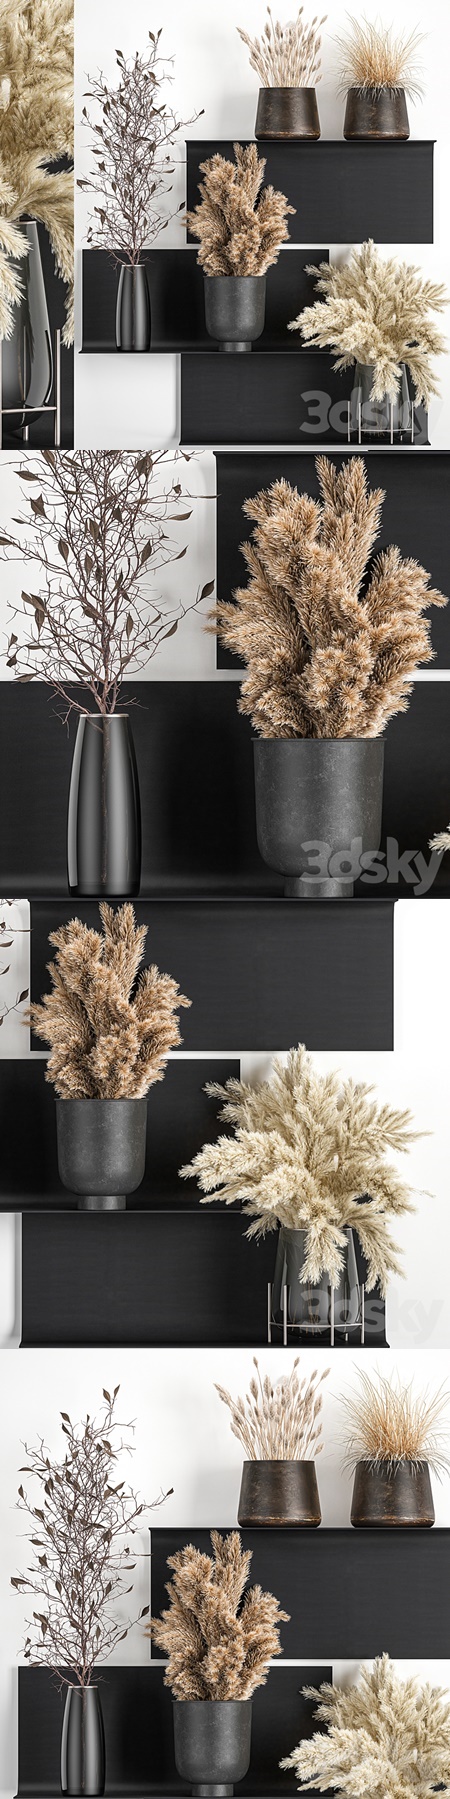 Bouquet 119. Pampas grass, branches, vase, reeds, dried flowers, metal shelf, shelf with flowers